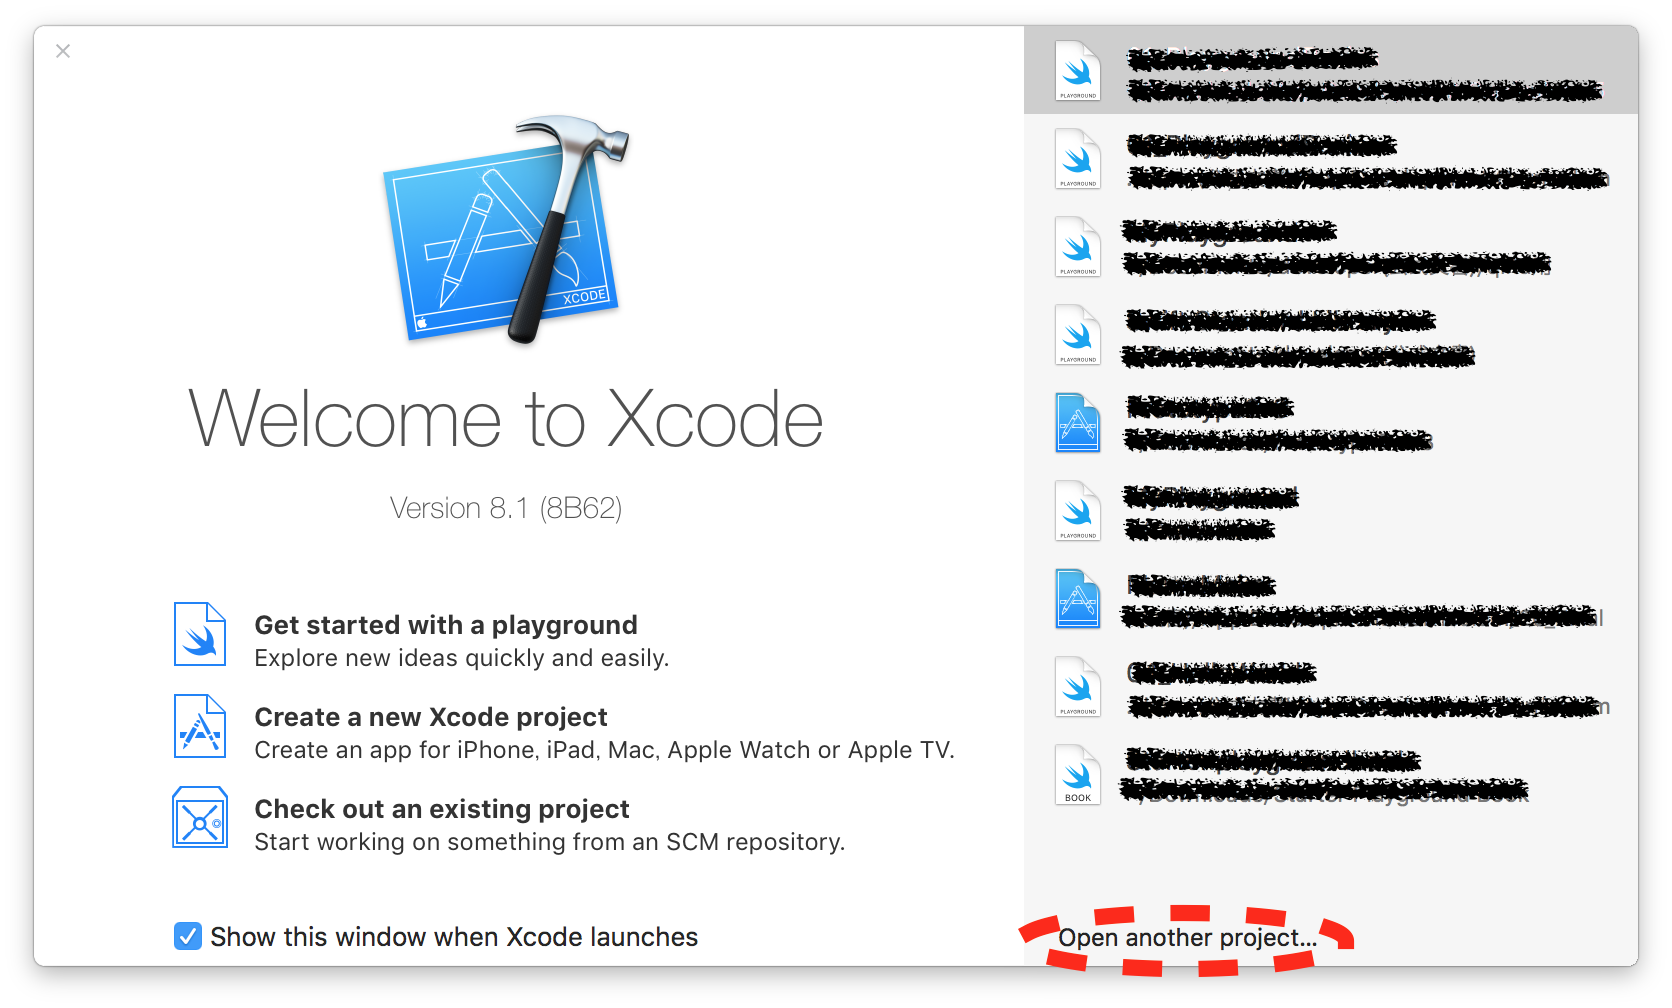 xcode01.png